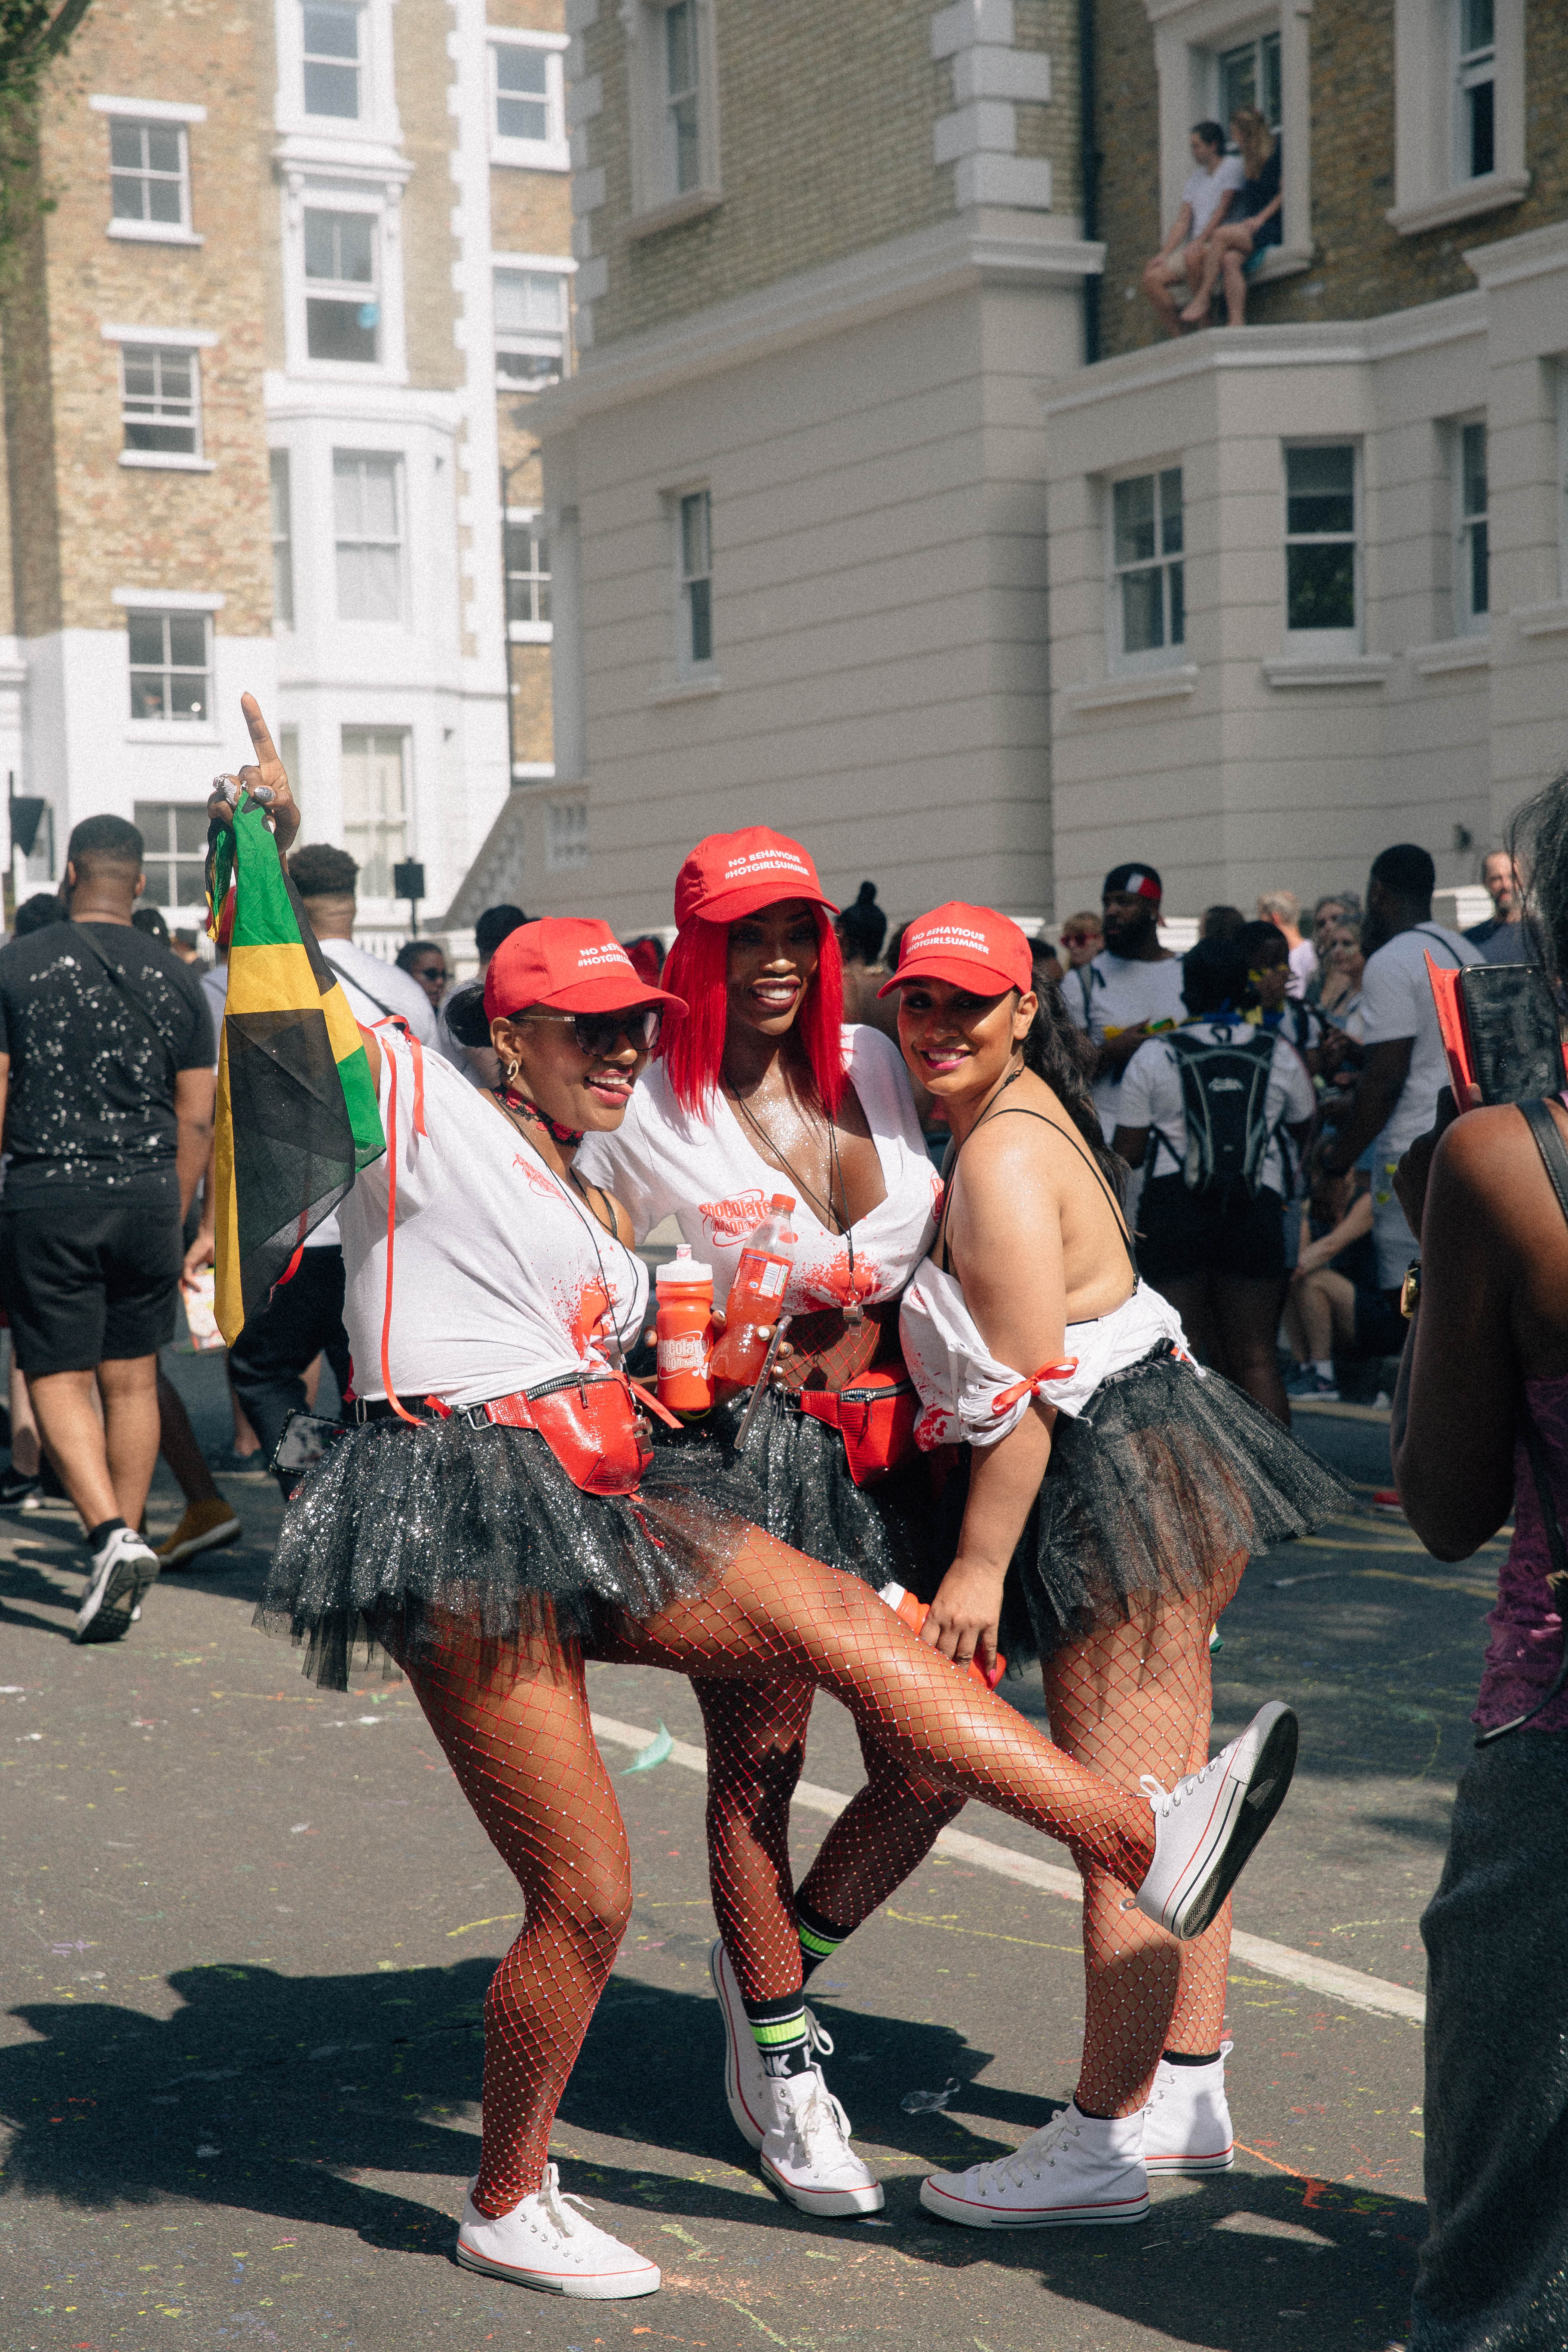 32 Times Notting Hill Carnival in London Gave Us Endless Vibes